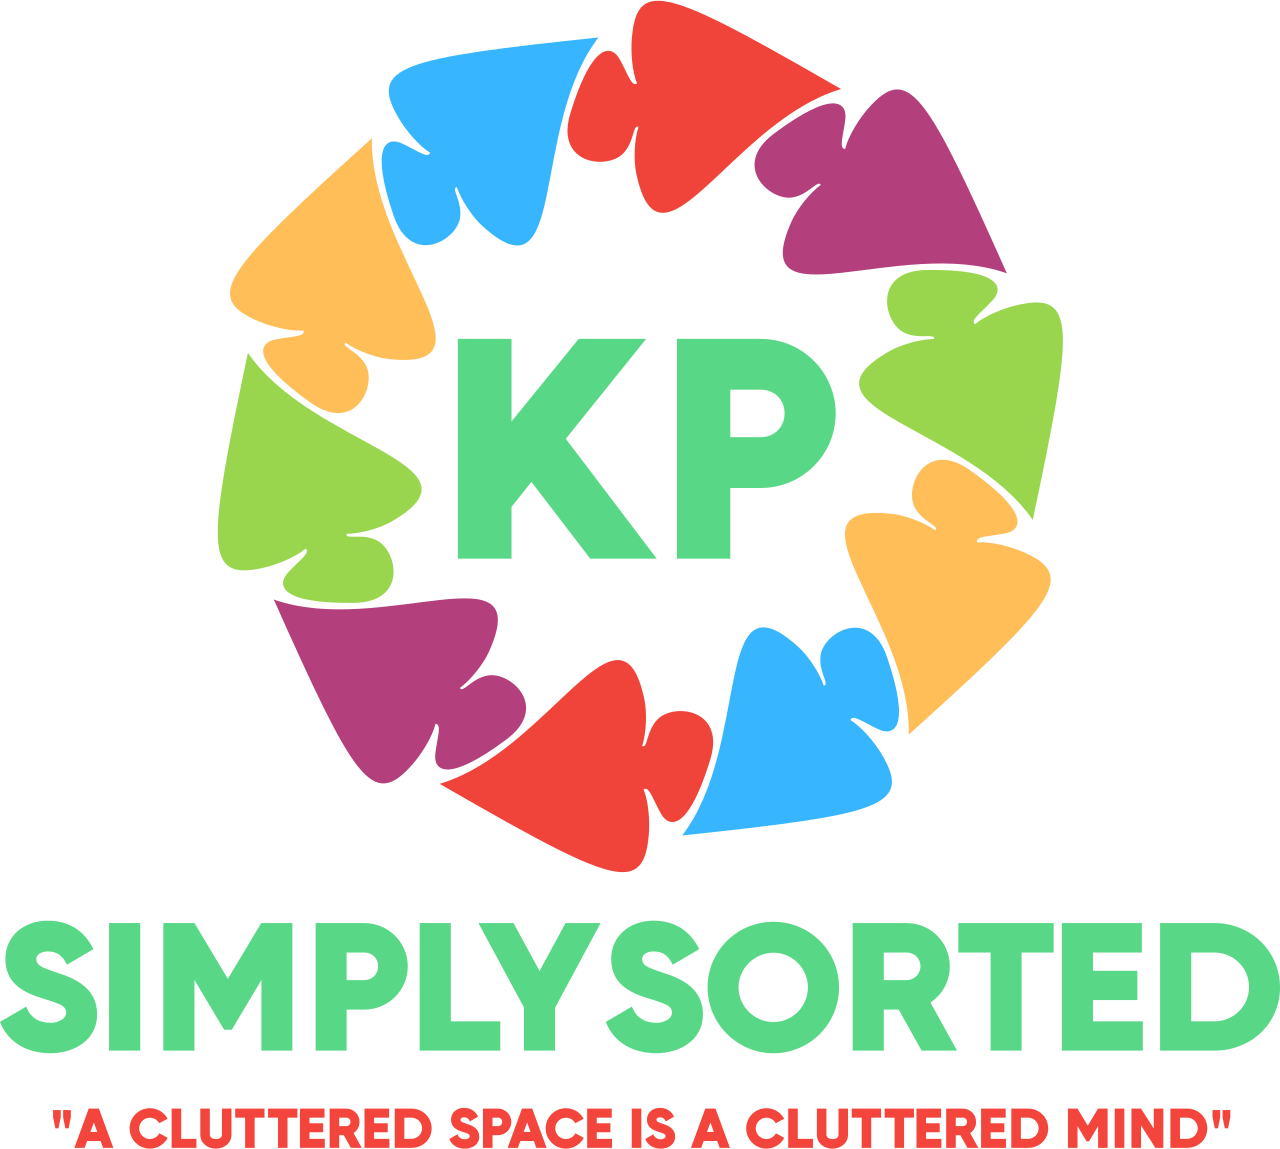 SimplySorted's logo